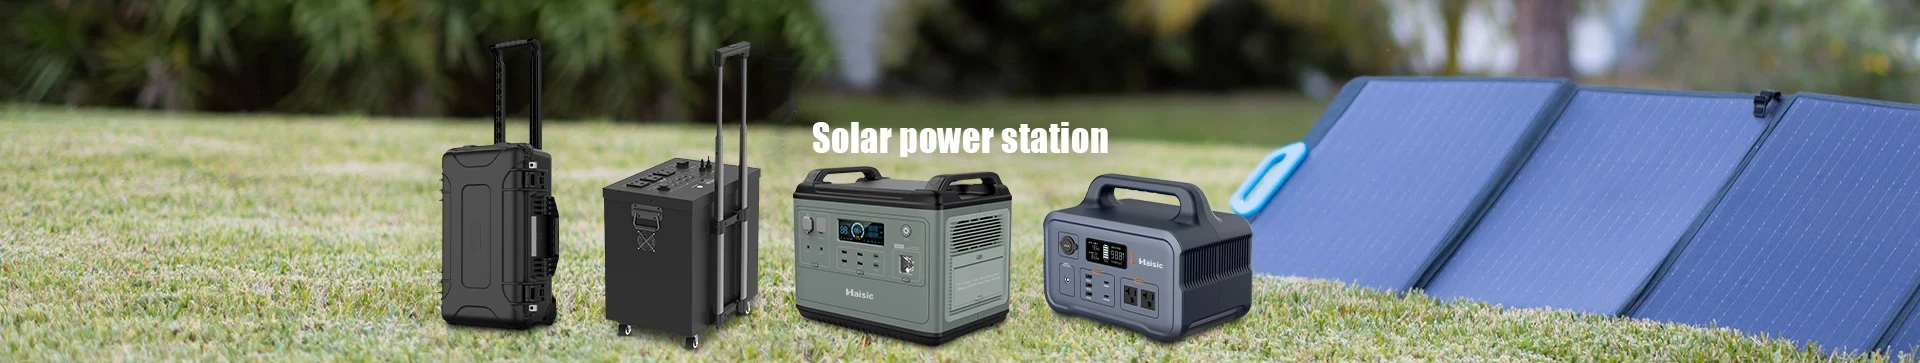 Outdoor emergency power supply